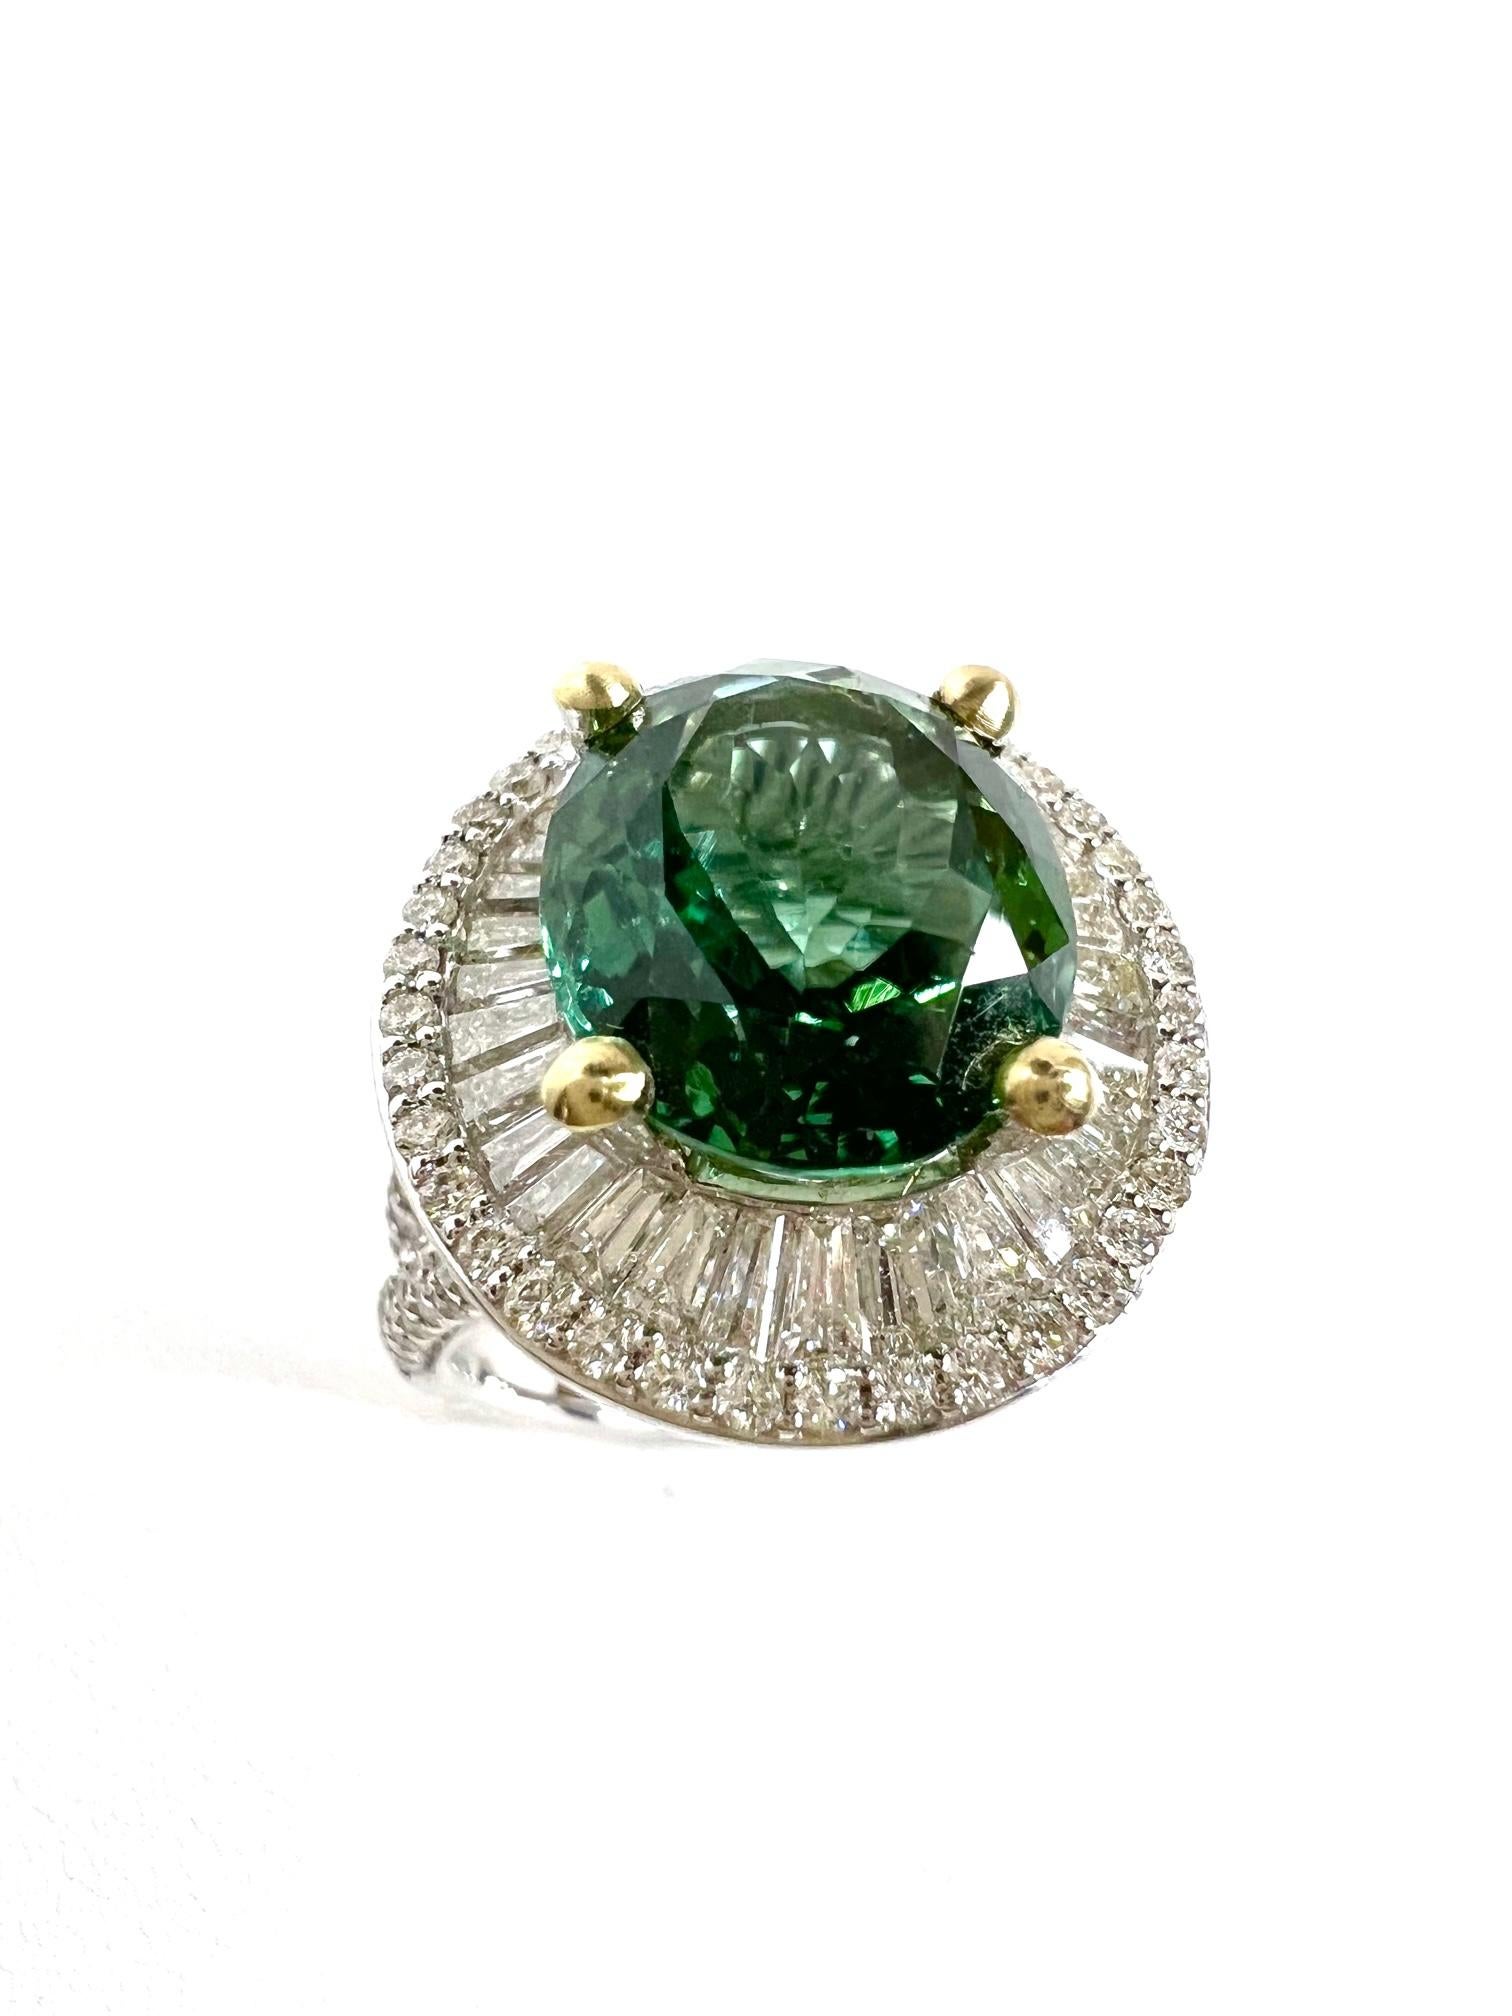 Thomas Leyser is renowned for his contemporary jewellery designs utilizing fine gemstones.

Ring in 18k White Gold (12gr.) with a 1x top quality Green/Blue Tourmaline (fac., oval, 13,2x10,8mm, 7,15cts.) + Diamonds (tapez-cut, I/VS-SI, 2,56cts.) +